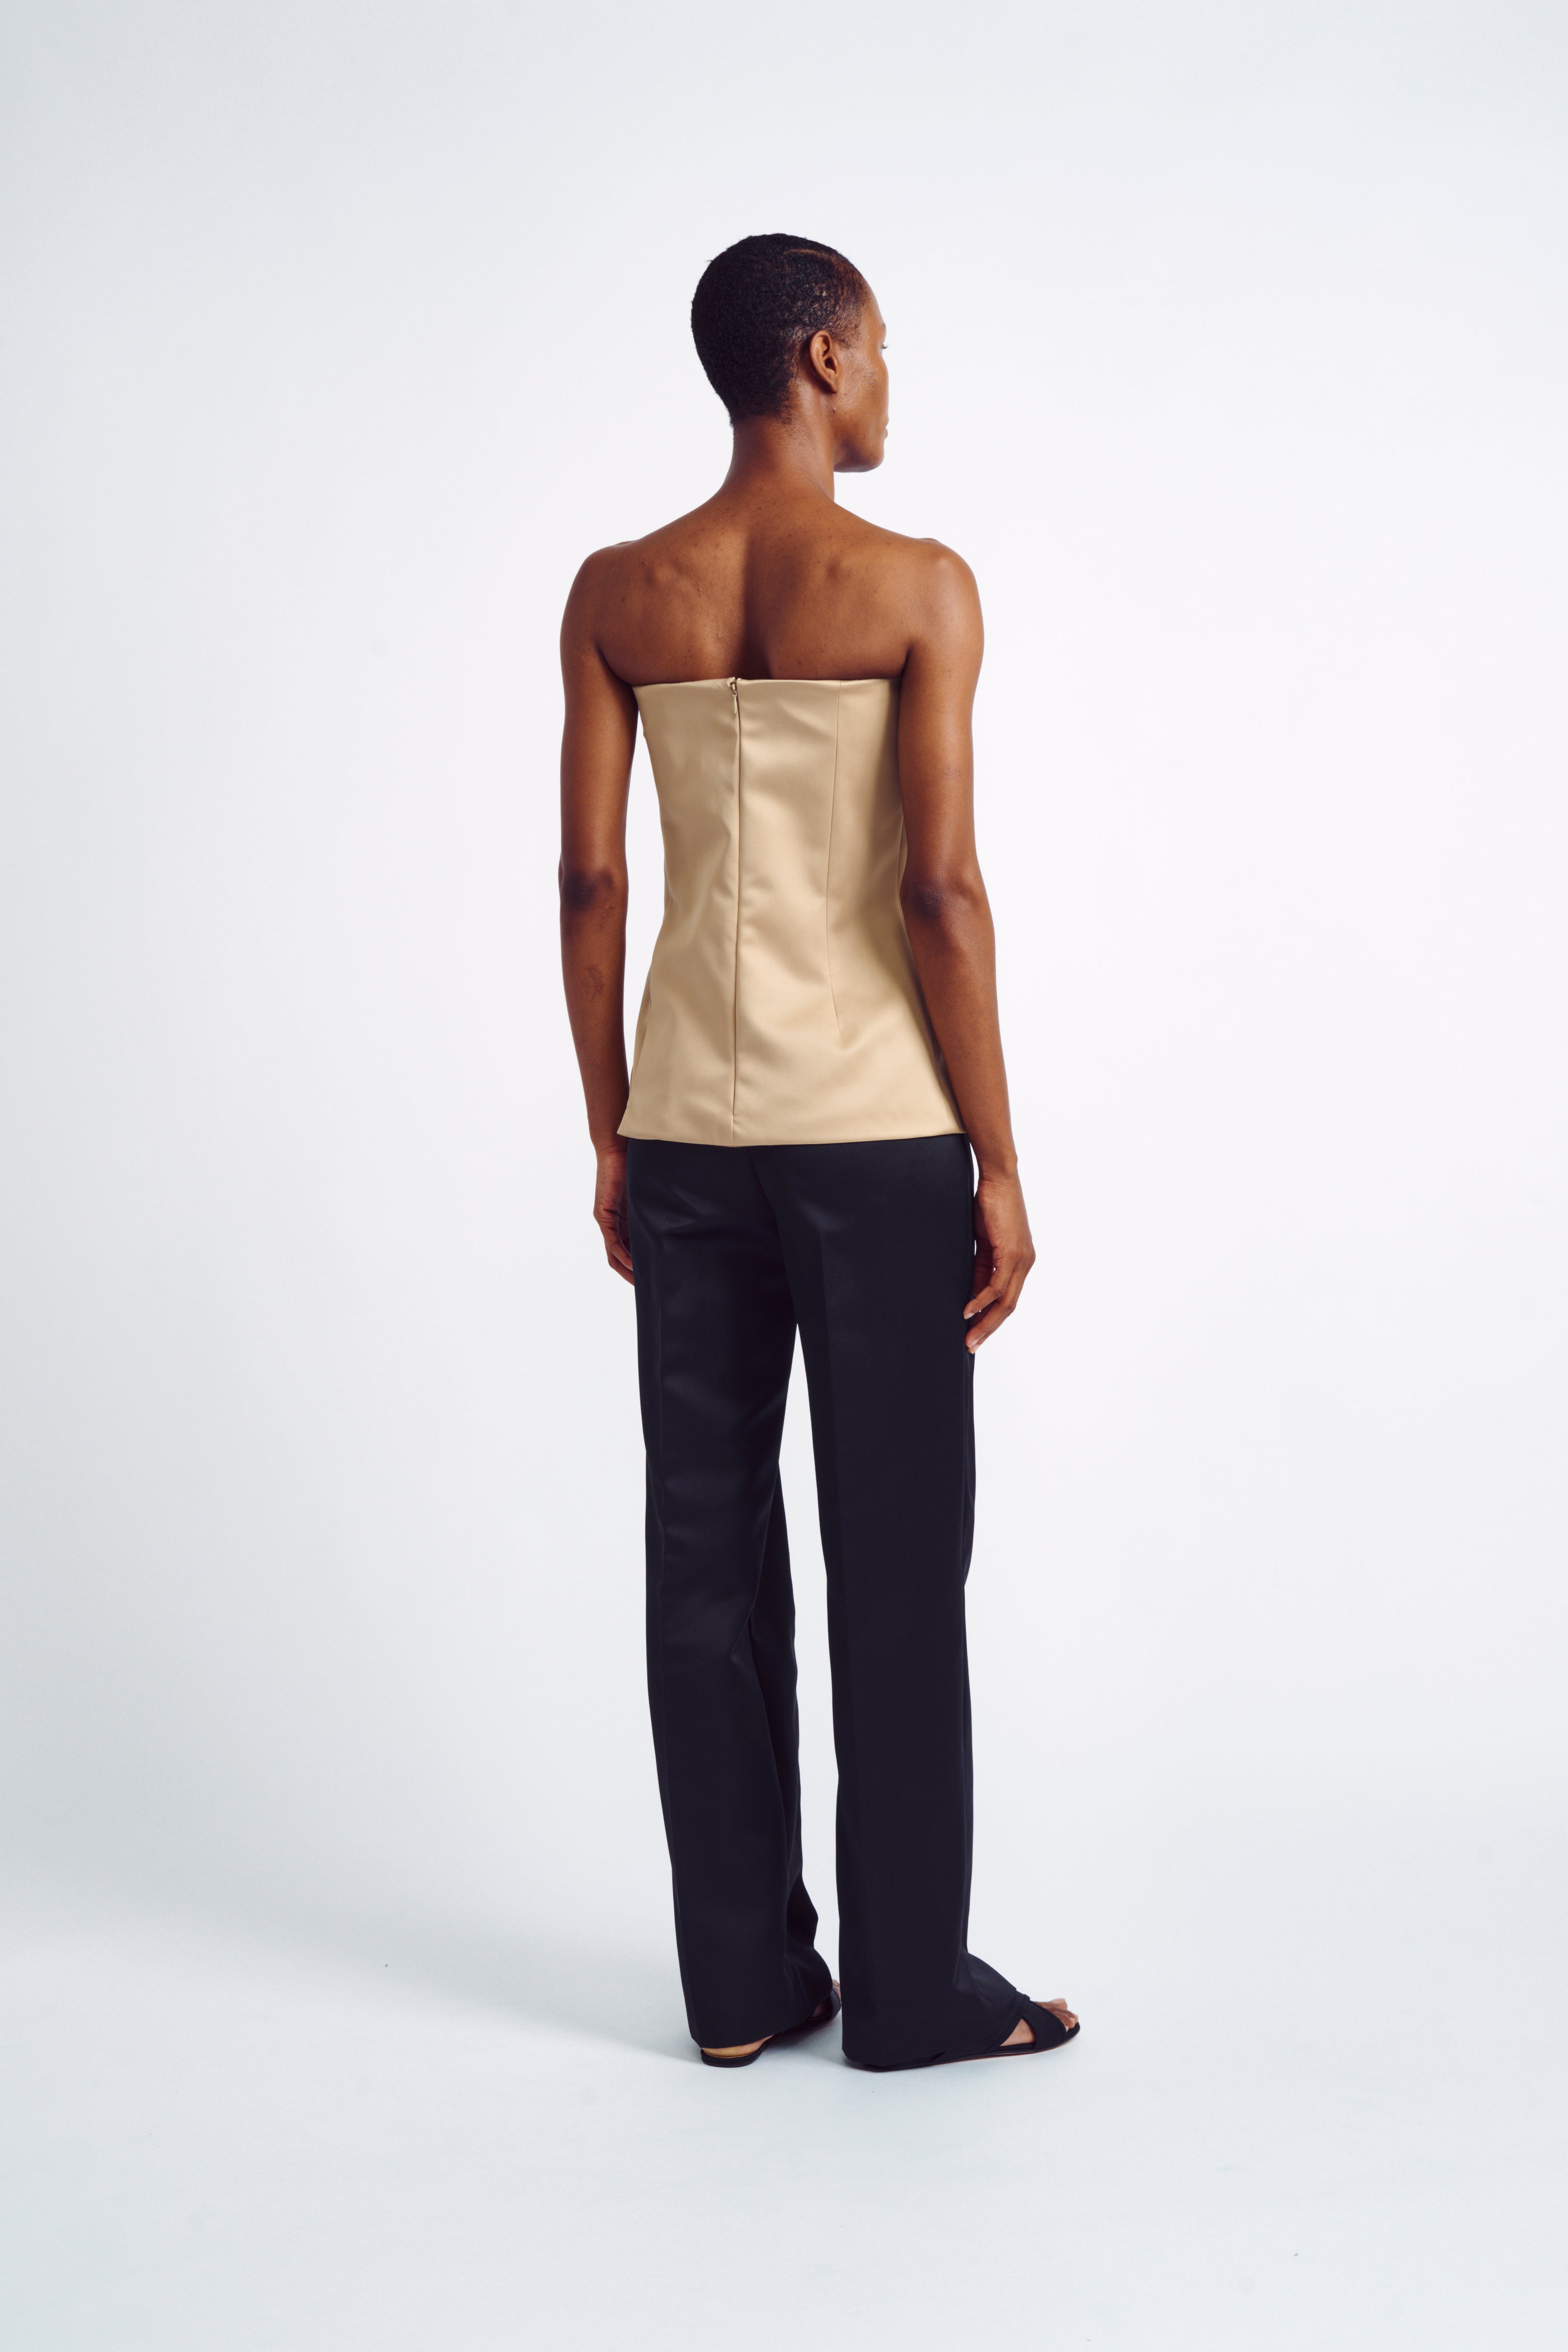 Tandy Top, Champagne Bonded Satin Strapless Top